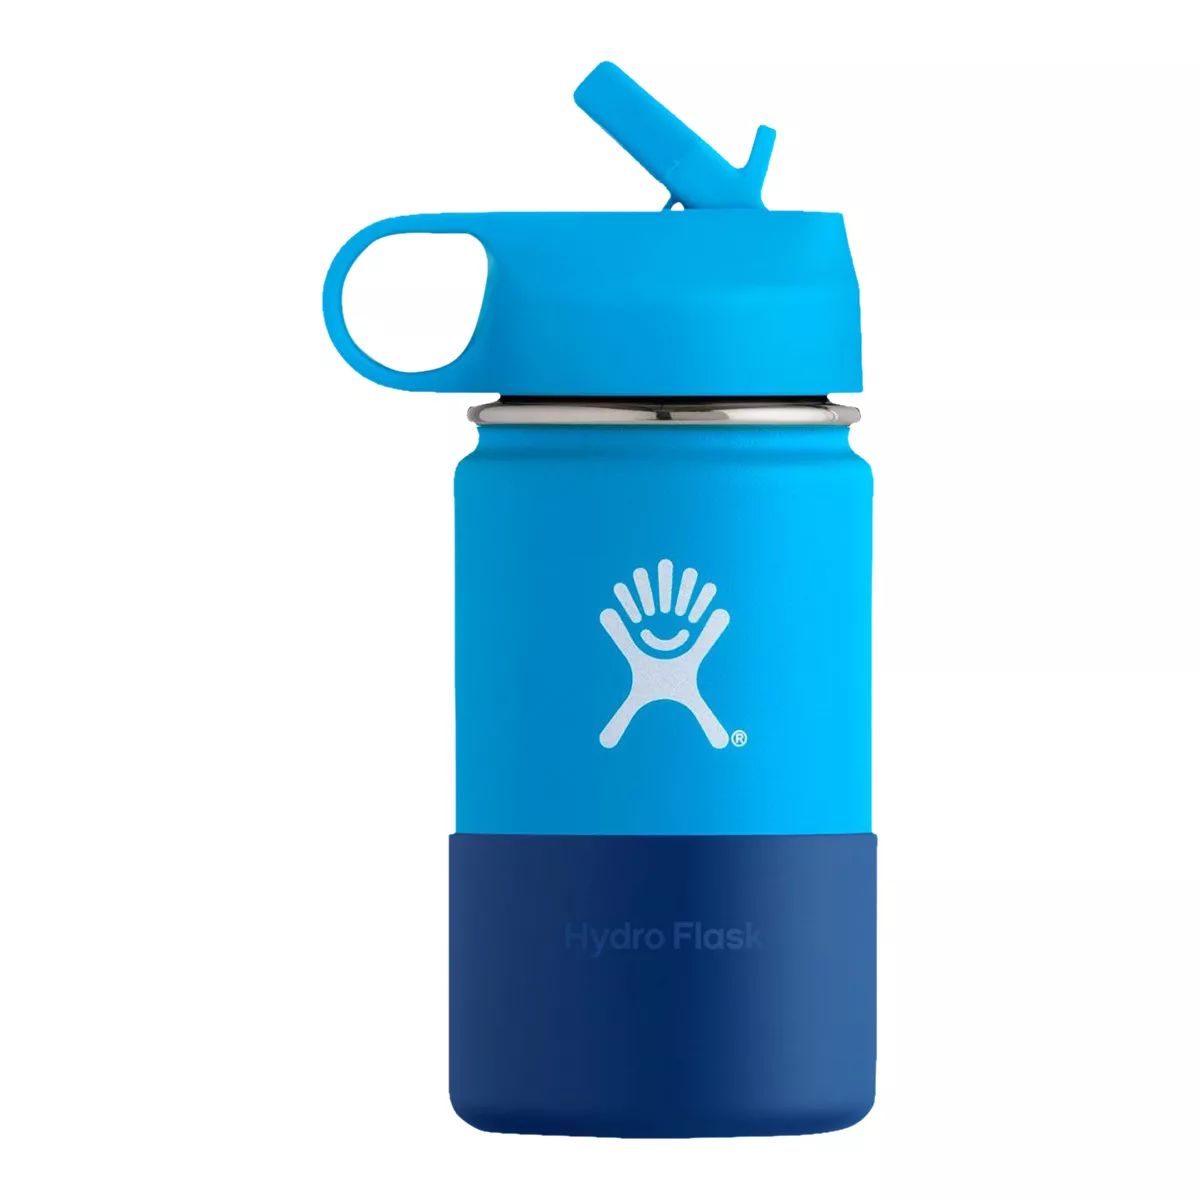 https://media-www.atmosphere.ca/product/div-01-hardgoods/dpt-38-hydration/sdpt-14-stainless-steel/333242385/hydroflask-12oz-kids-wide-mou-pacificpacific-n-s--1f8a3646-4a36-413c-9497-c0948daea476-jpgrendition.jpg?imdensity=1&imwidth=640&impolicy=mZoom